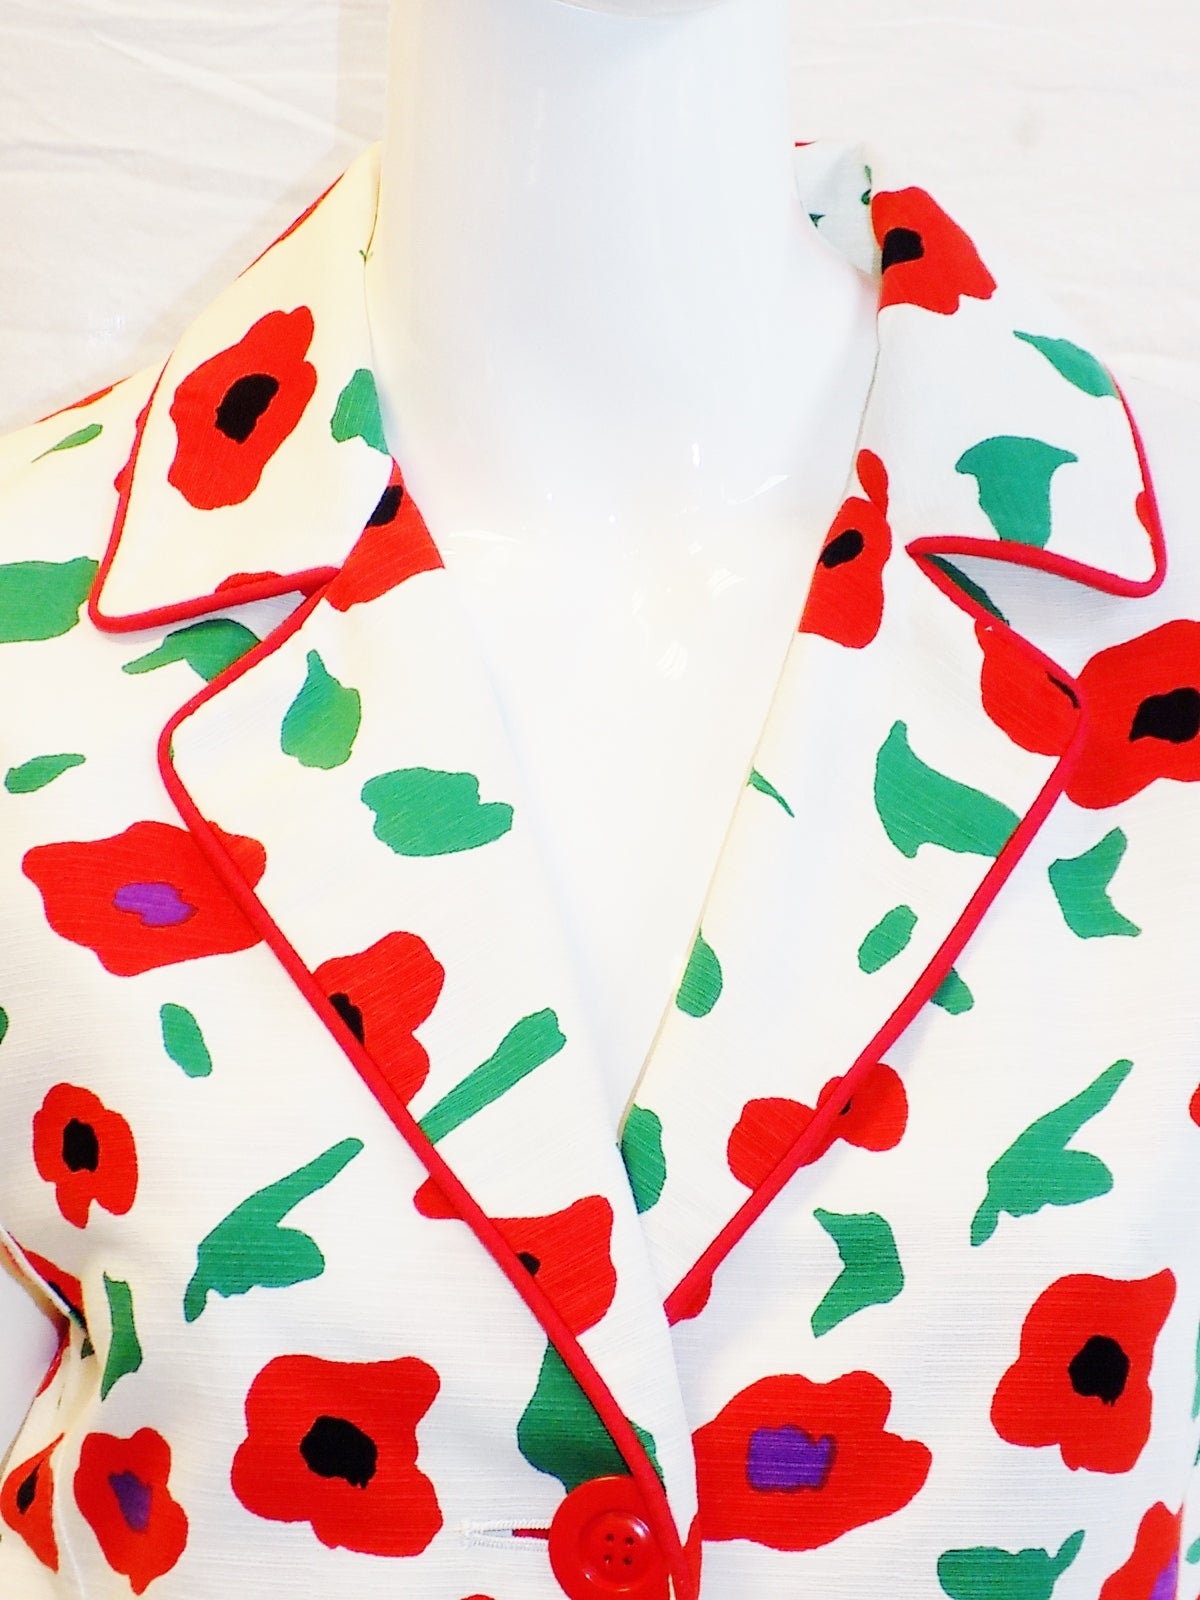 Very pretty cotton  YSL encore floral vest / sleeveless jacket  . Red piping , faux pockets, three front buttons closure. . Size 6
Mint condition. Perfect summer piece.
Bust 36